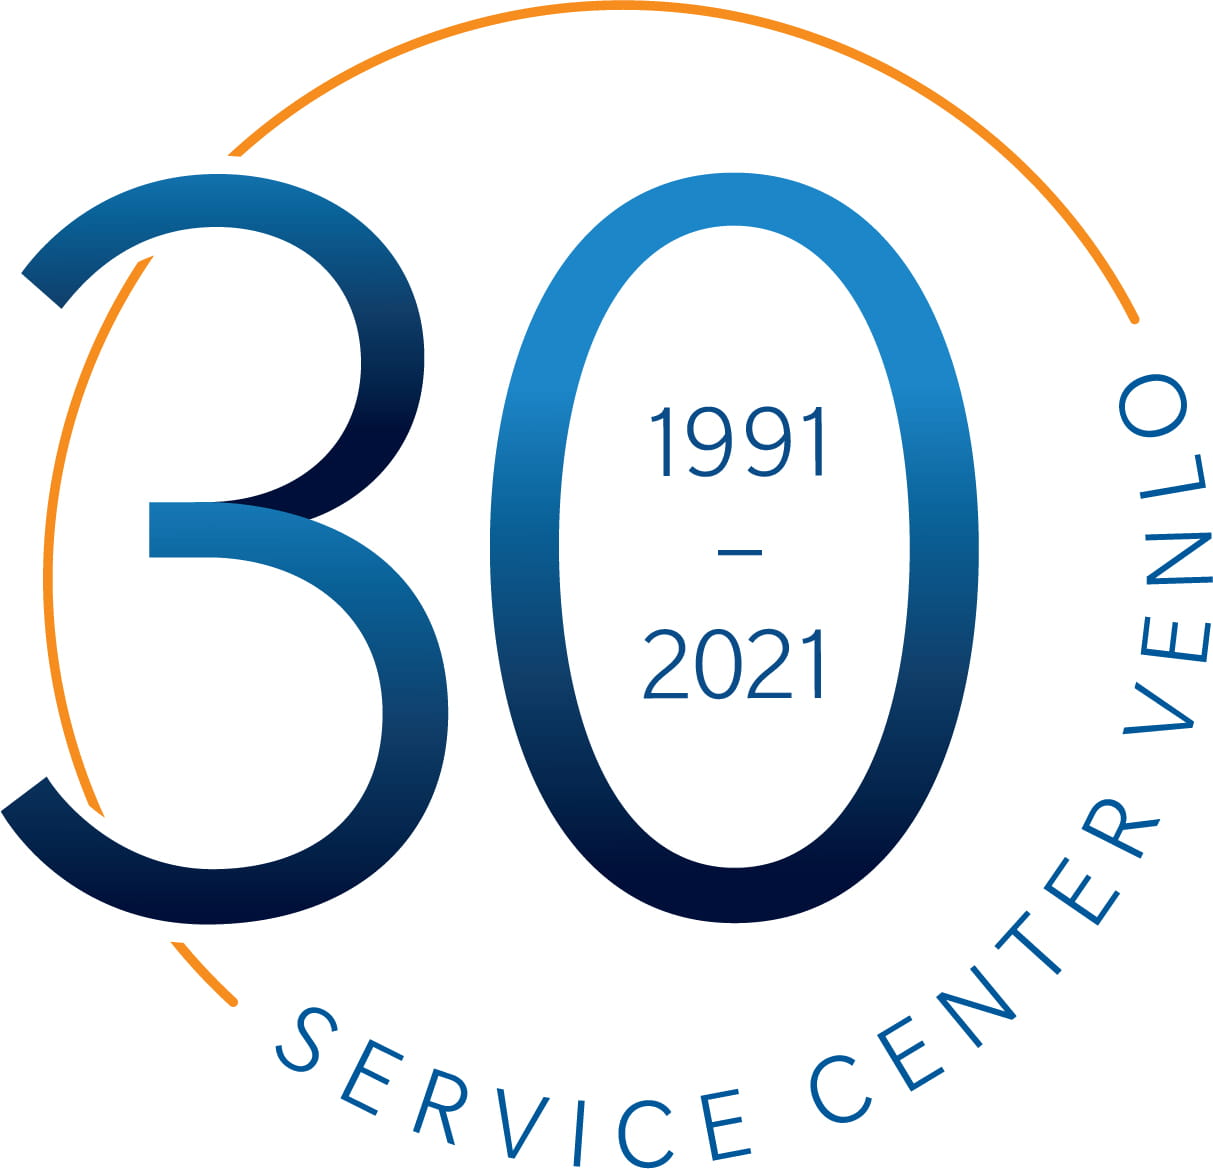 Celebrating servicing the Venlo area for 30 years 